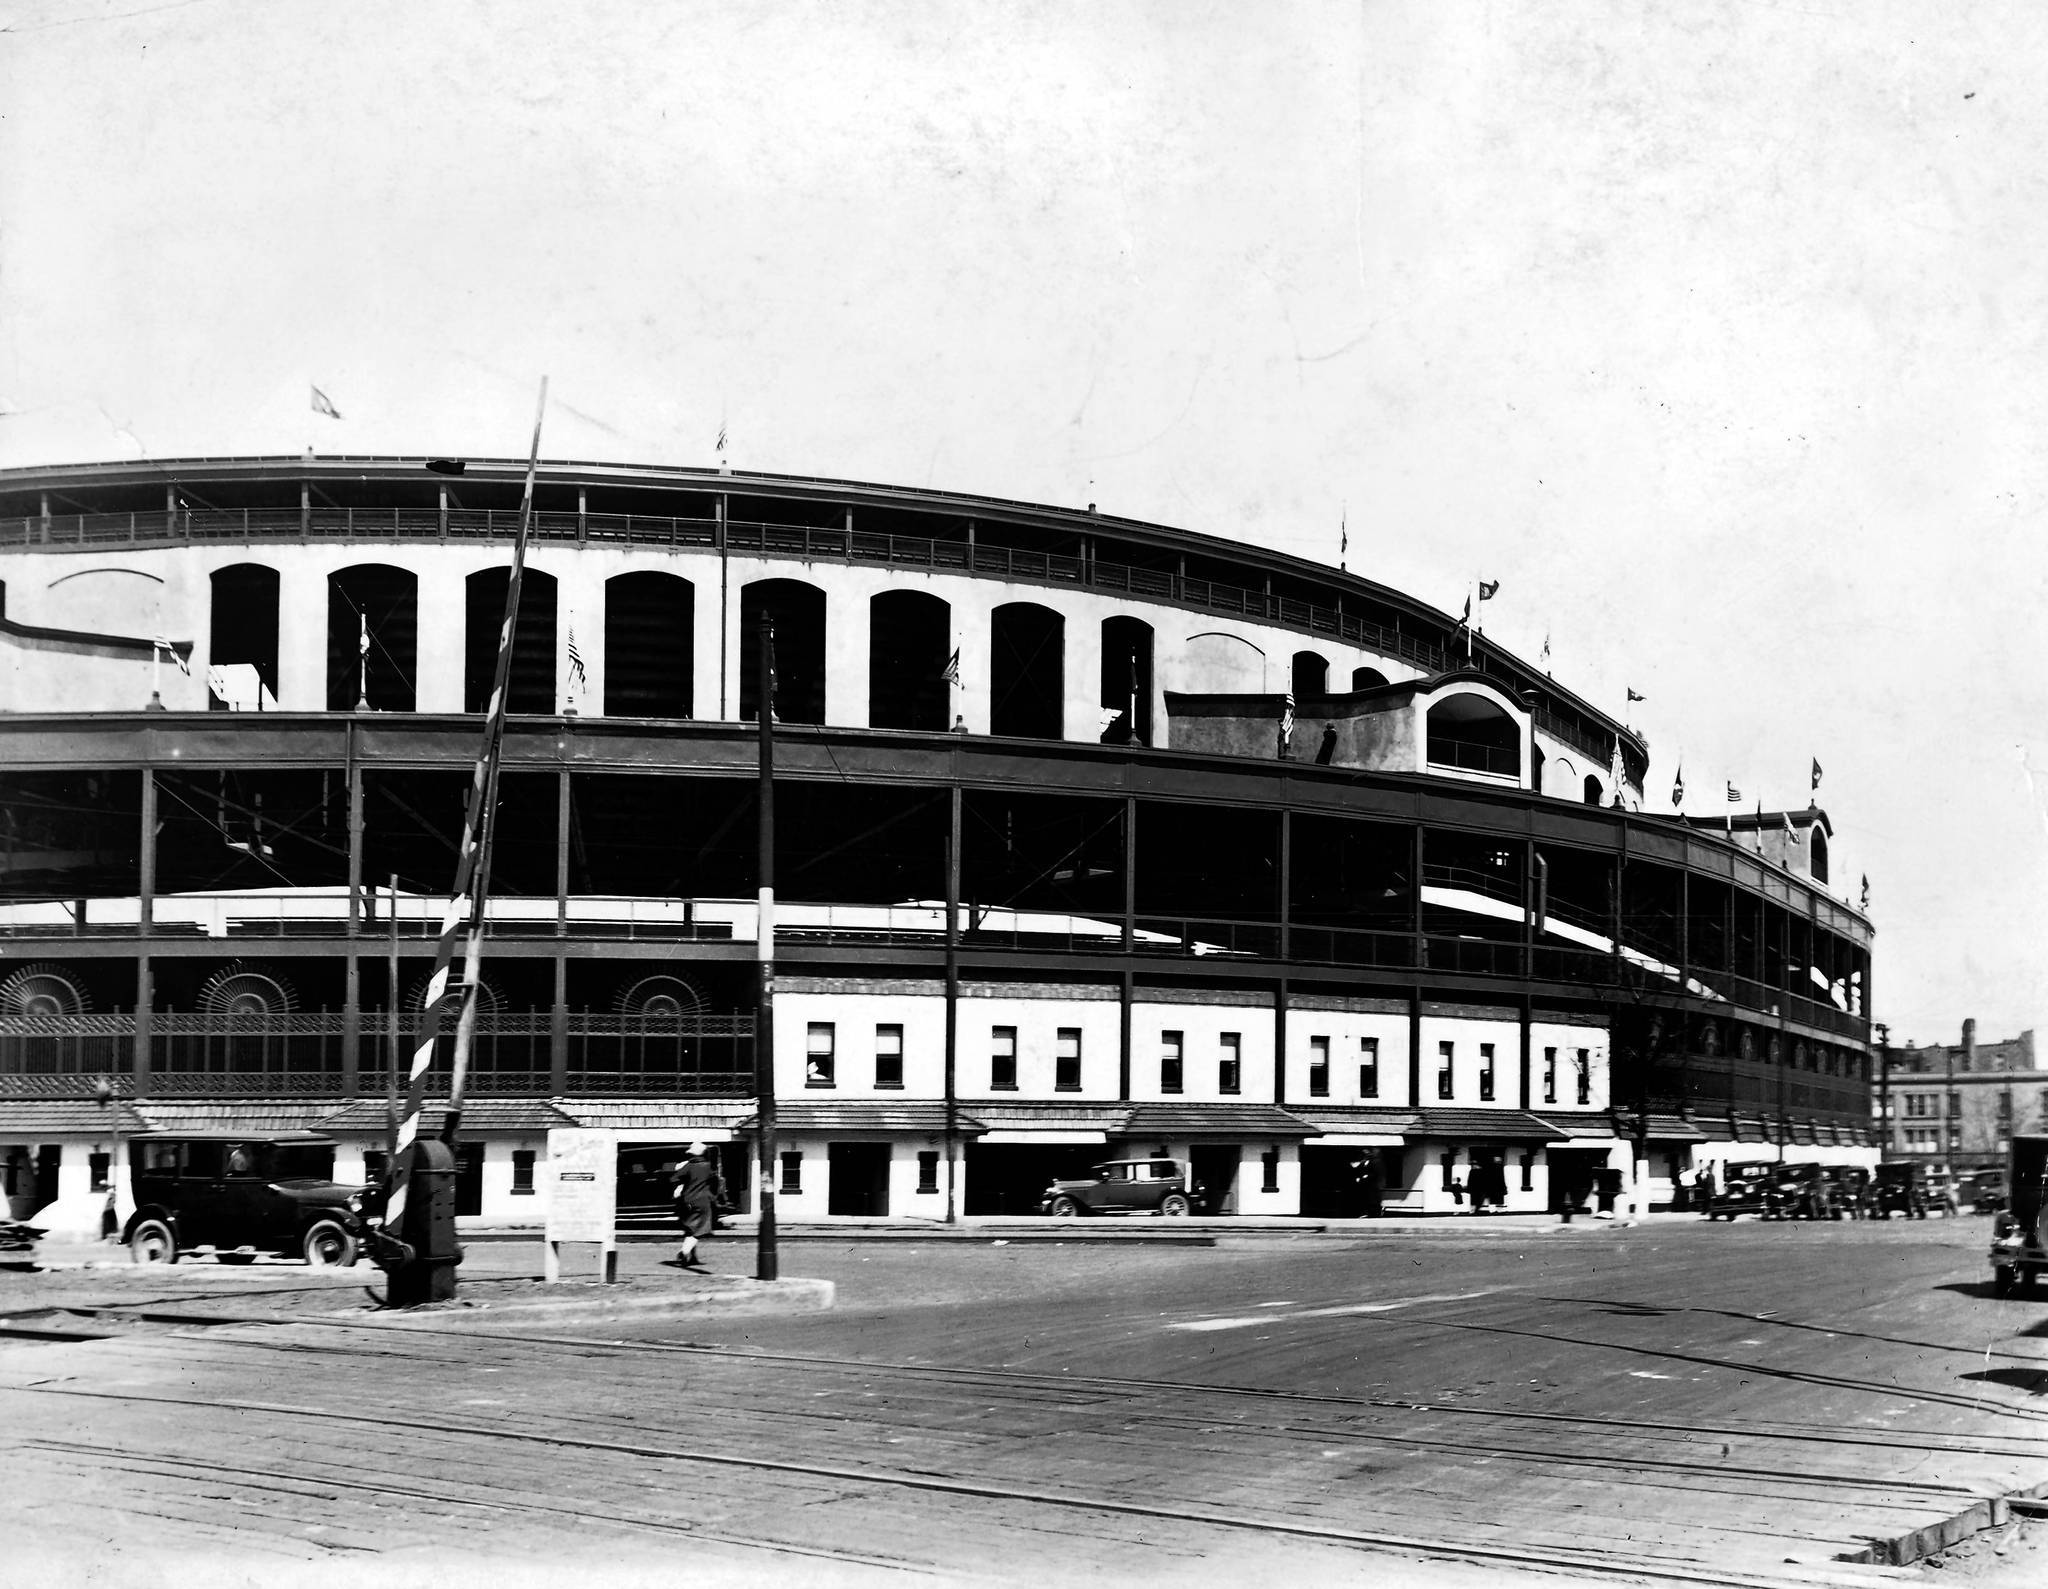 BB-810 CHICAGO CUBS' WRIGLEY FIELD EXTERIOR VIEW IN MAY 1939-8X10 PHOTO